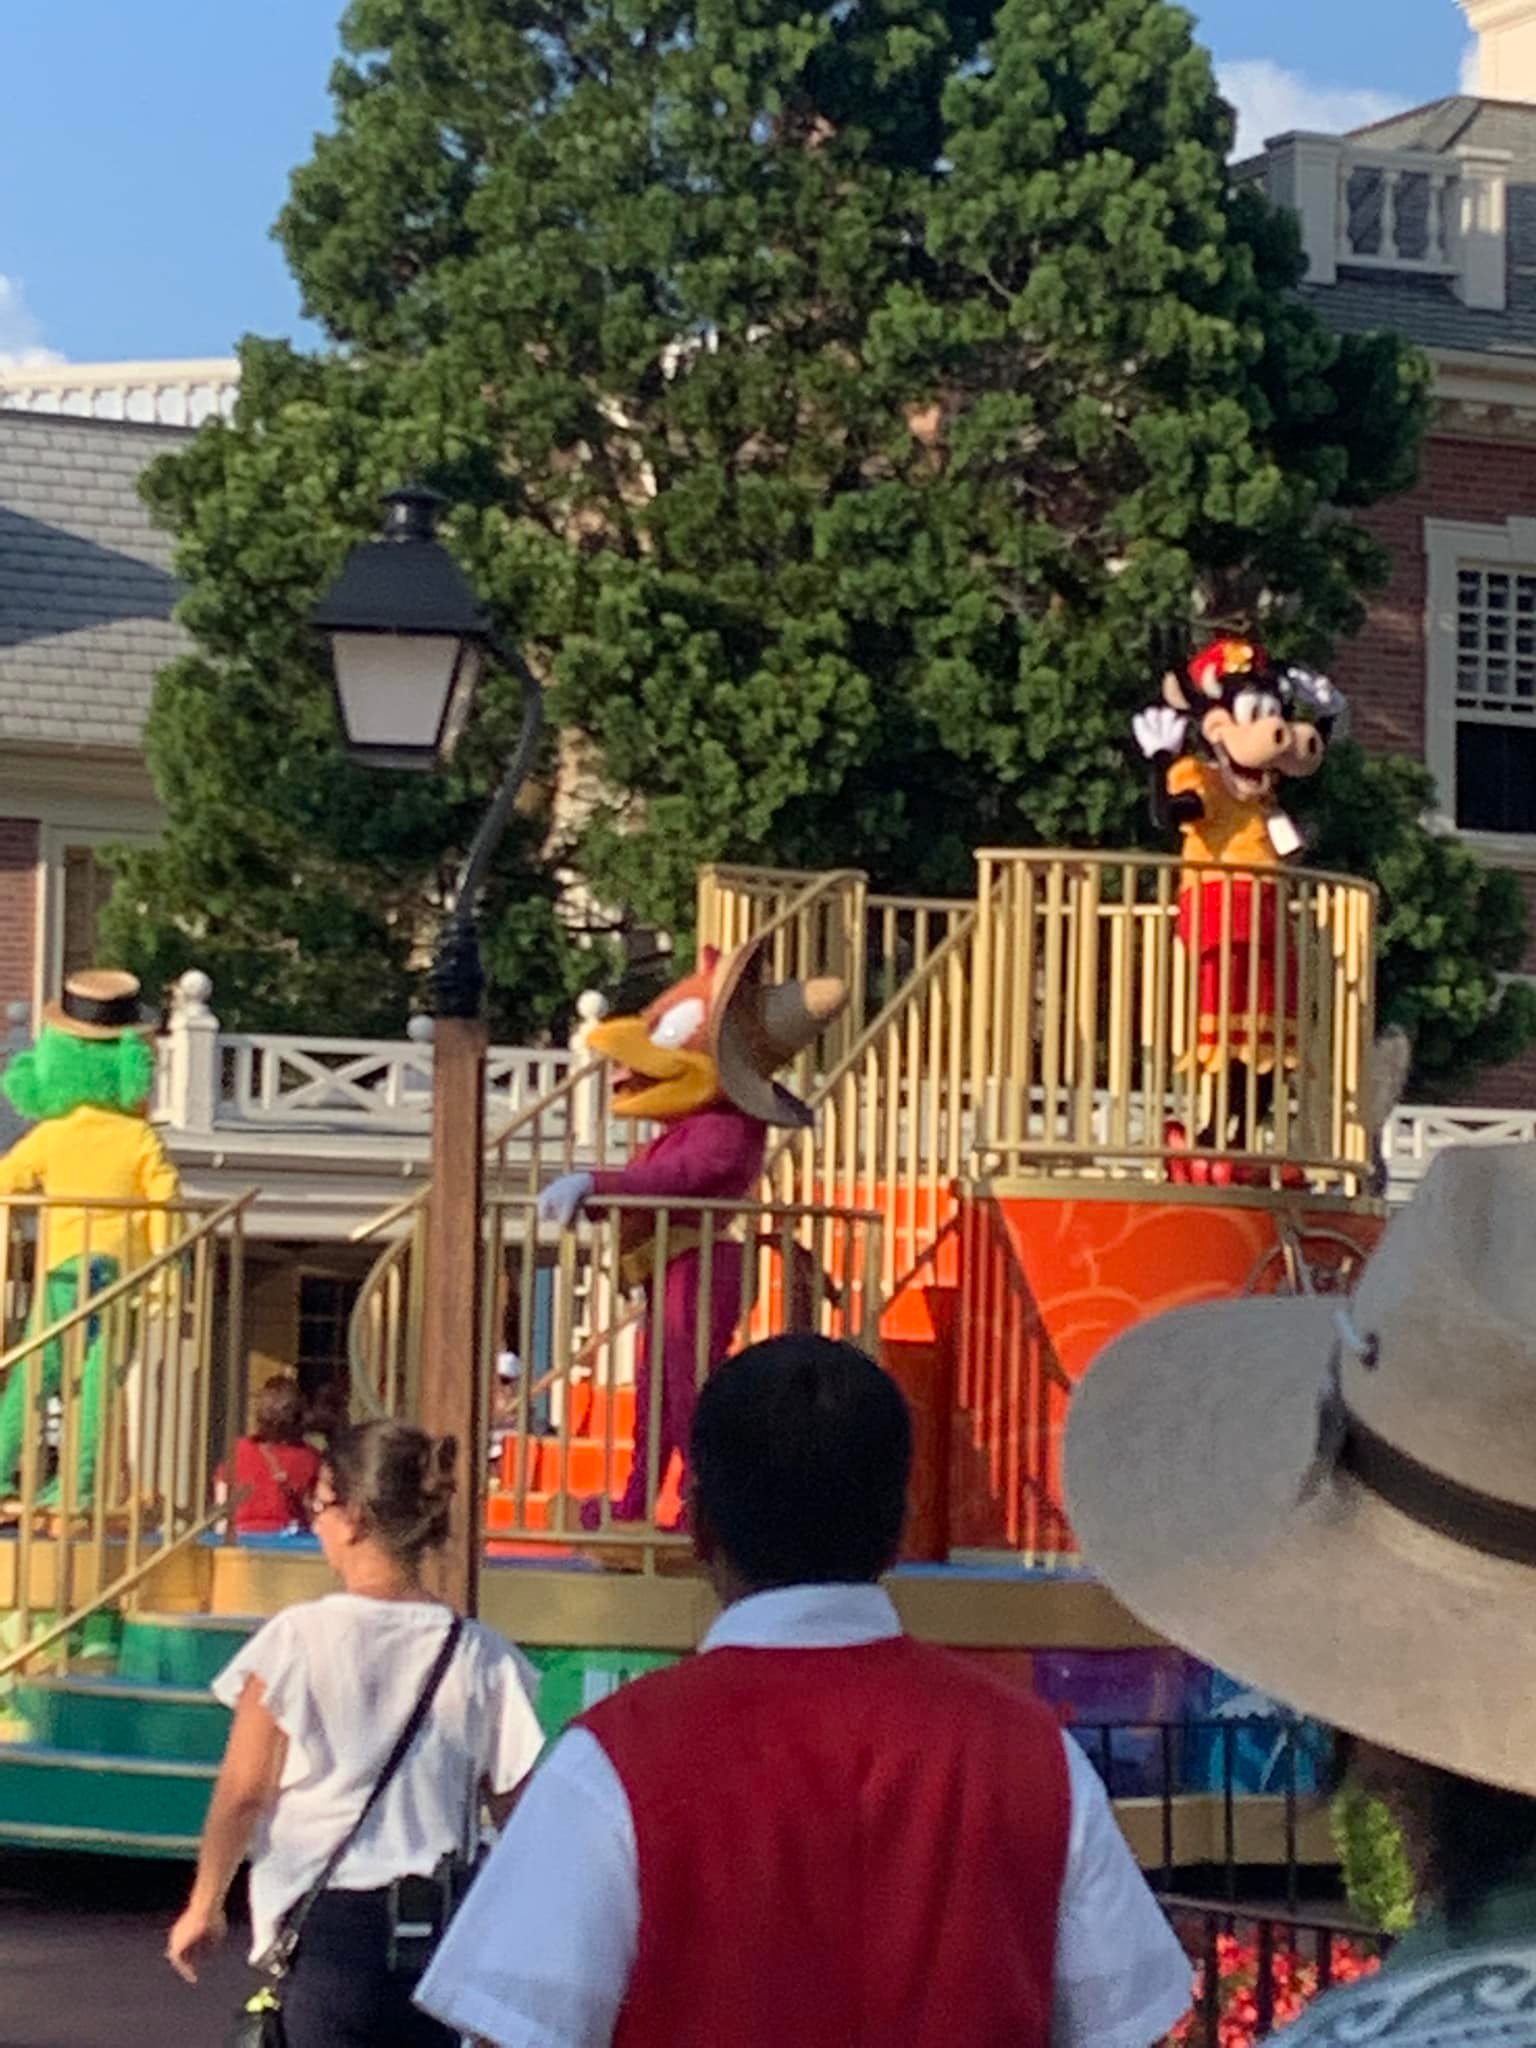 Clarabelle, Jose, and Panchito